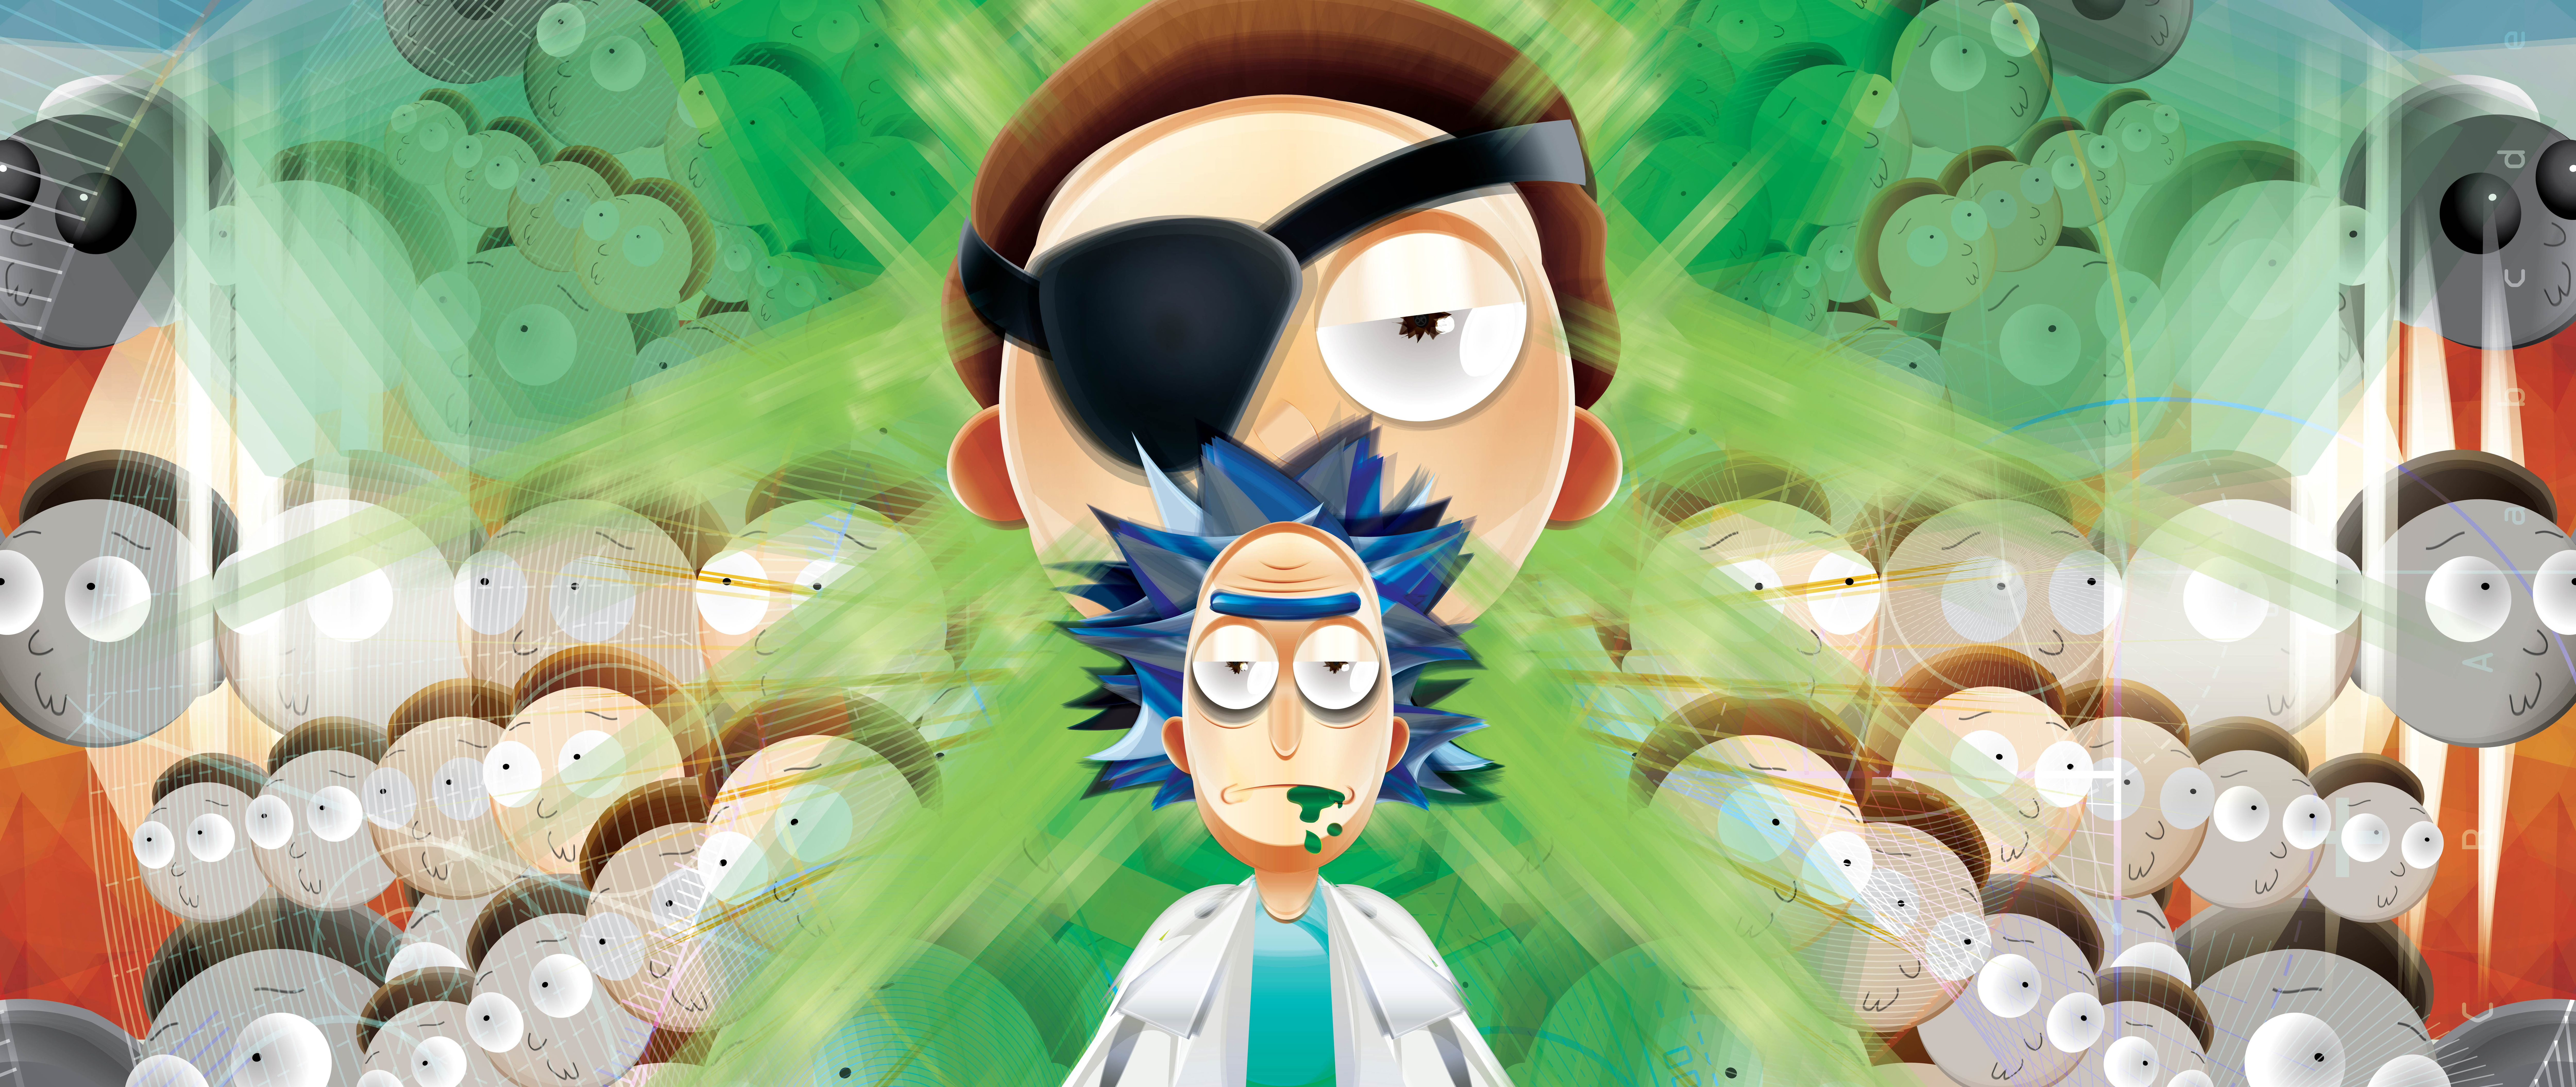 rick and morty, cartoons, tv shows, hd, animated tv series